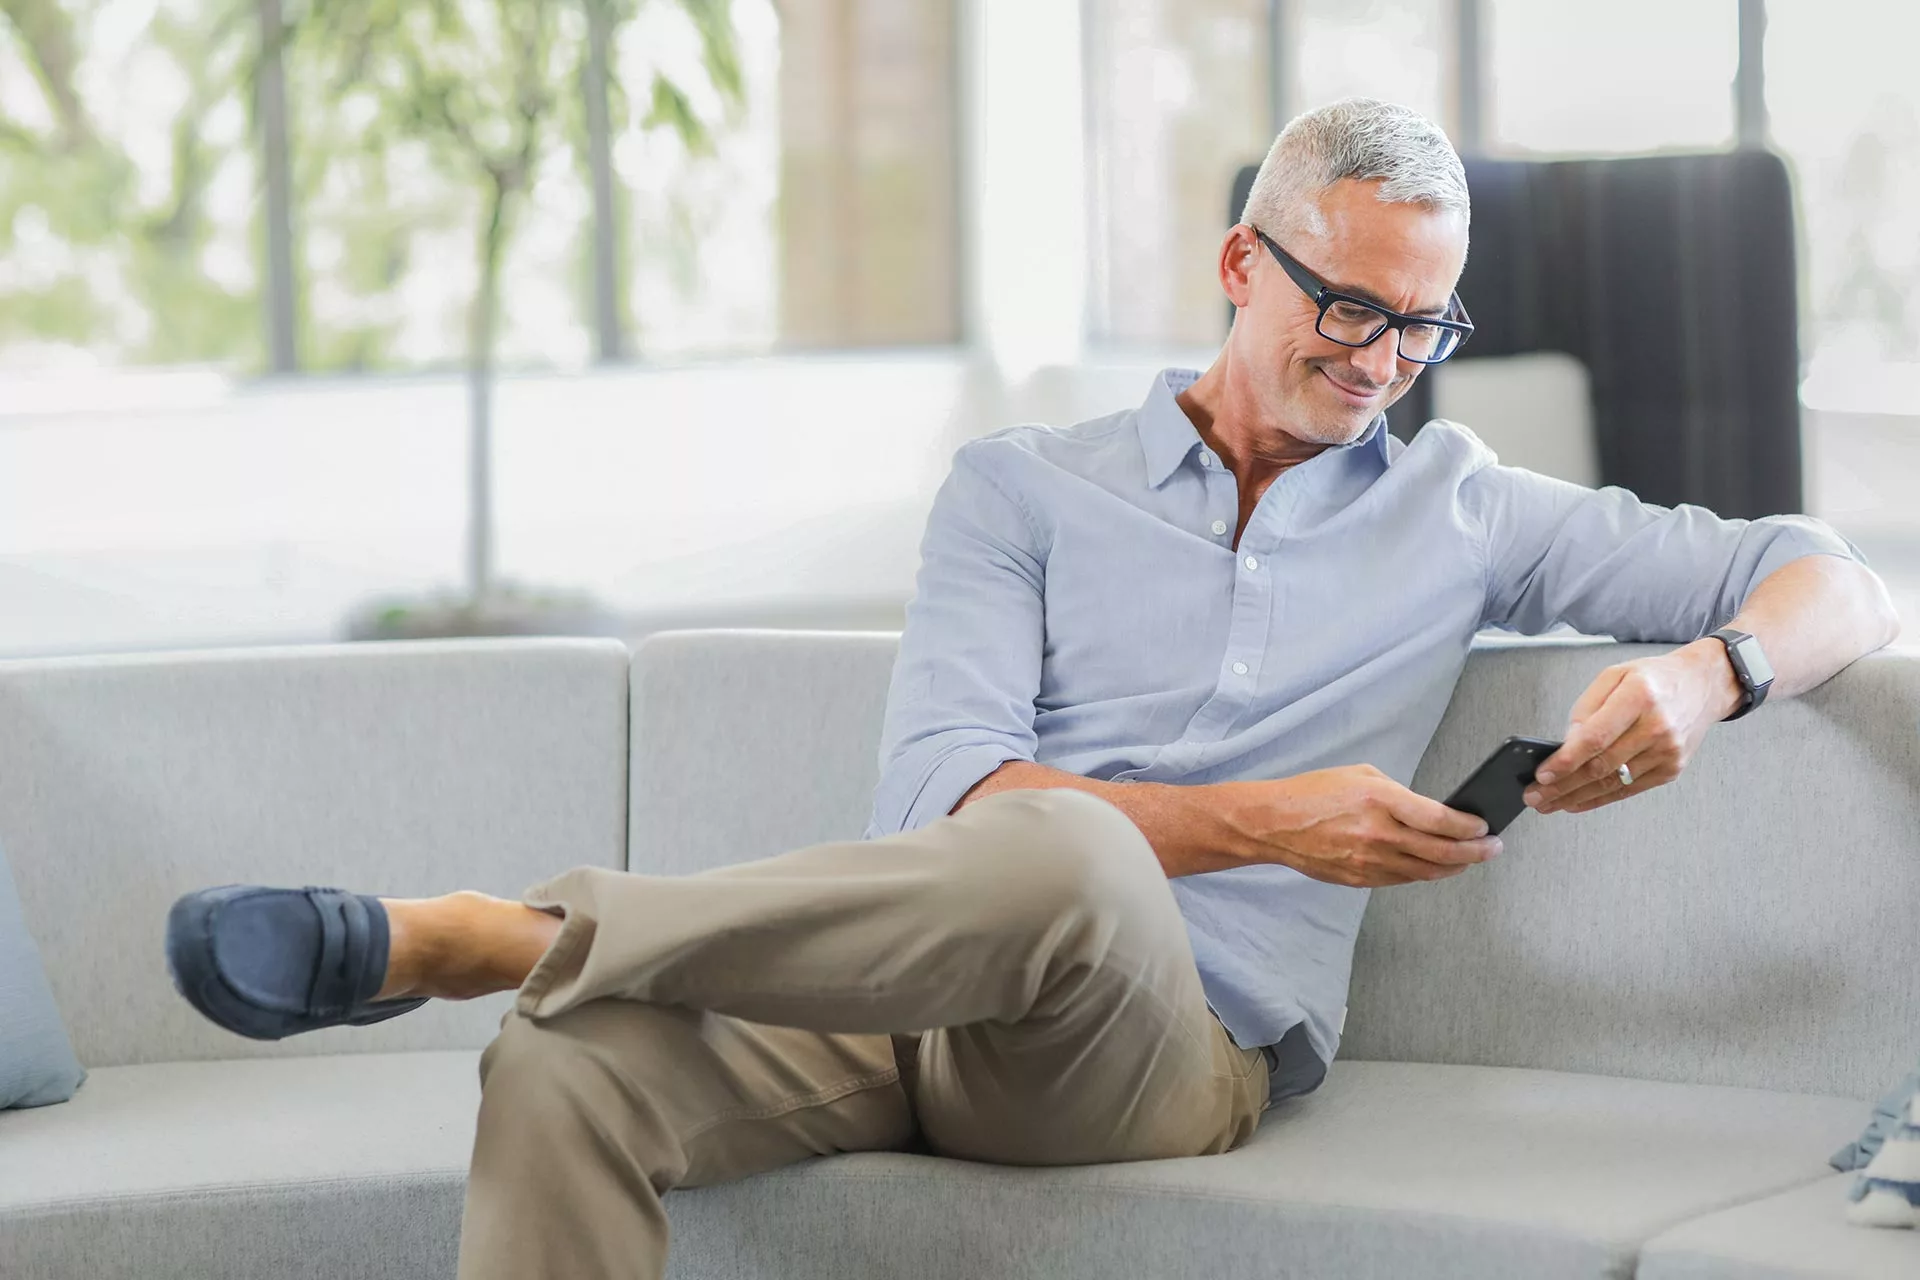 Man on couch smiling at phone